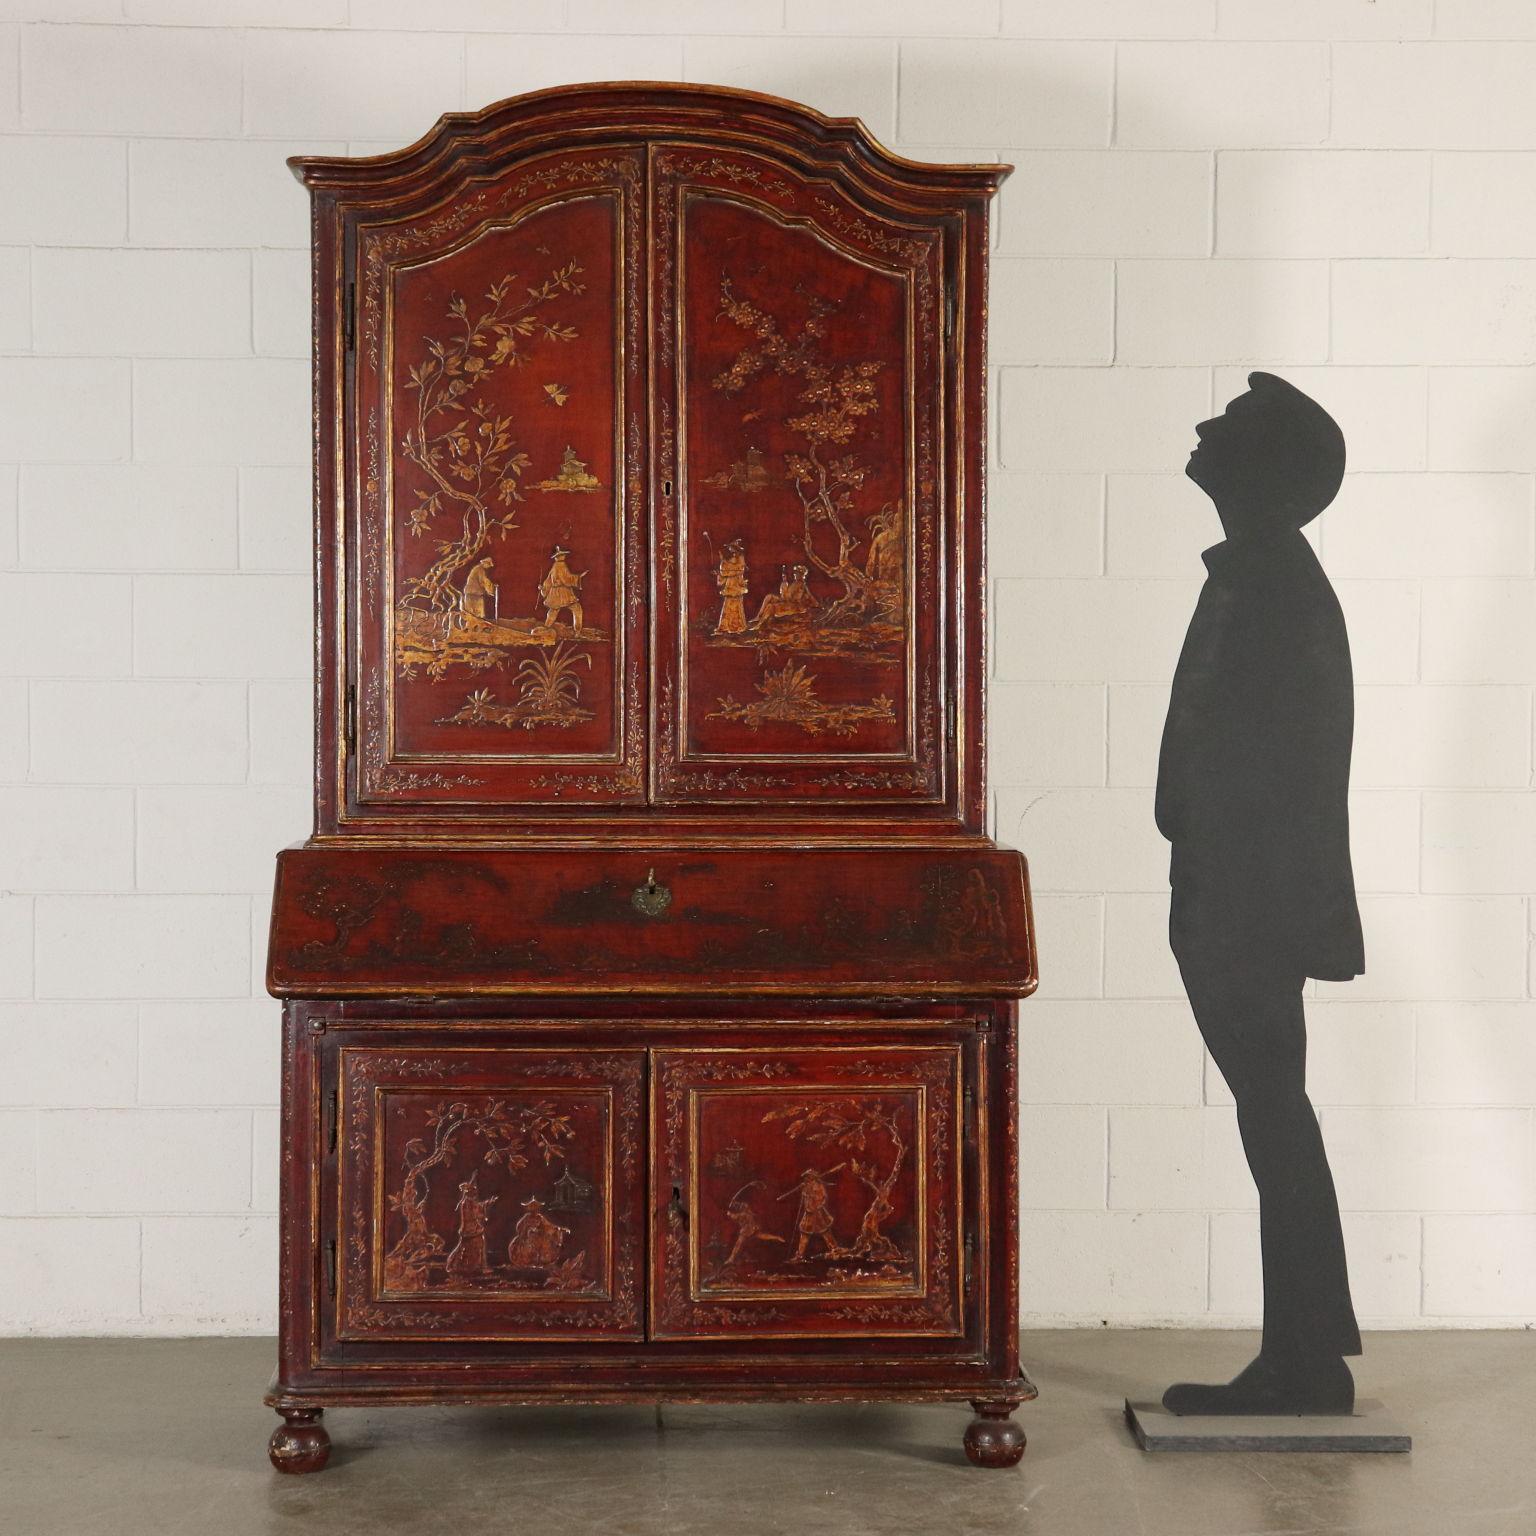 Bureau bookcase composed of a cupboard with two doors and drop-leaf door with inner compartments as a base and upper case with shelves and two doors. Poplar interiors. The piece is made of walnut, completely lacquered with chinoiserie ornaments and